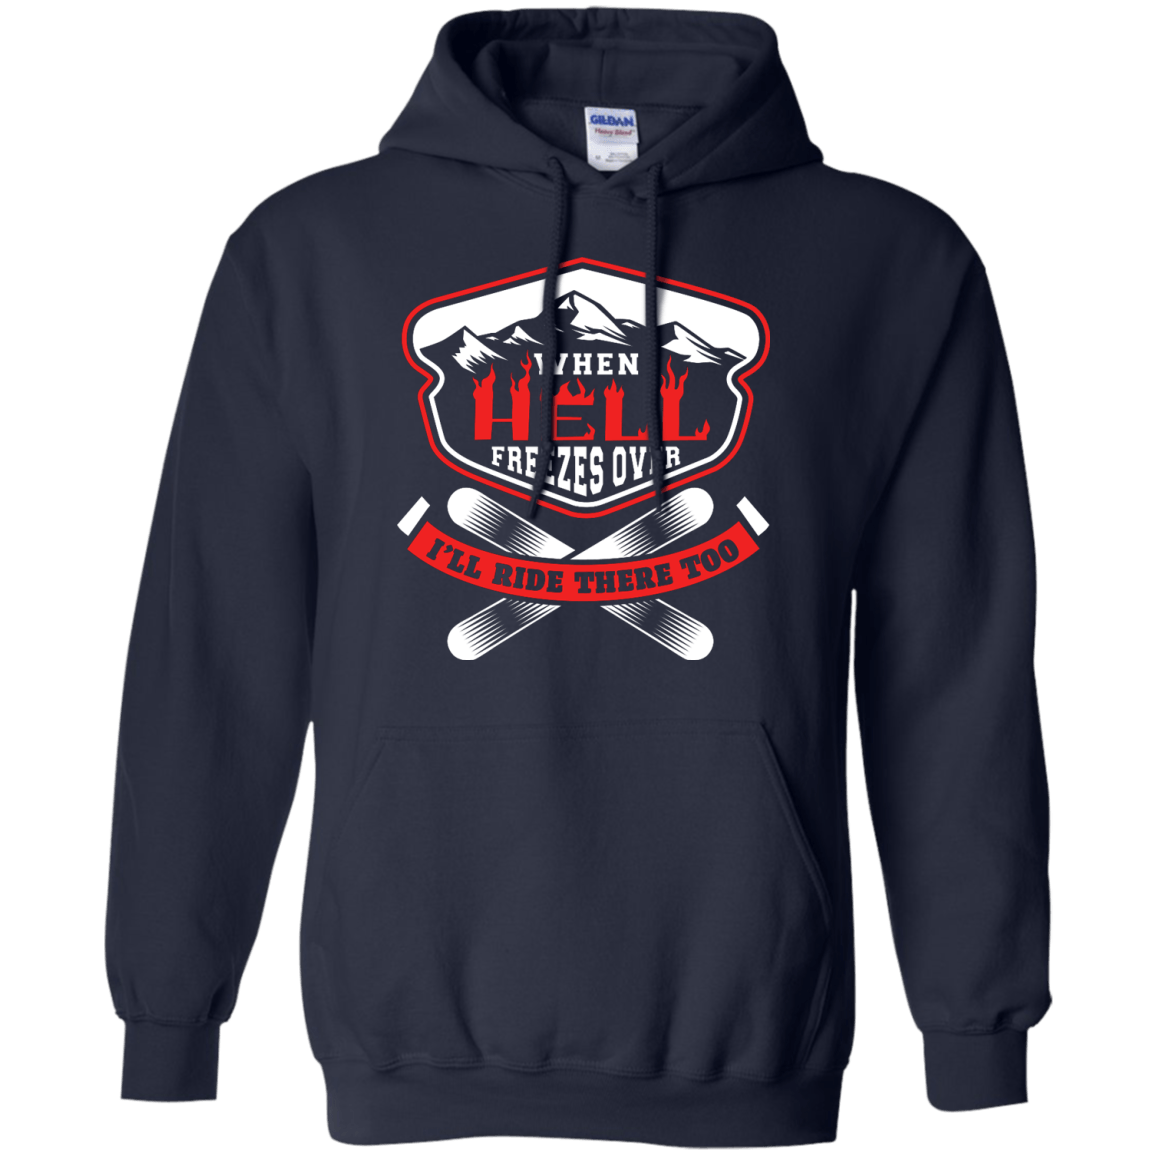 When Hell Freezes Over I'll Ride There Too Hoodies - Powderaddicts